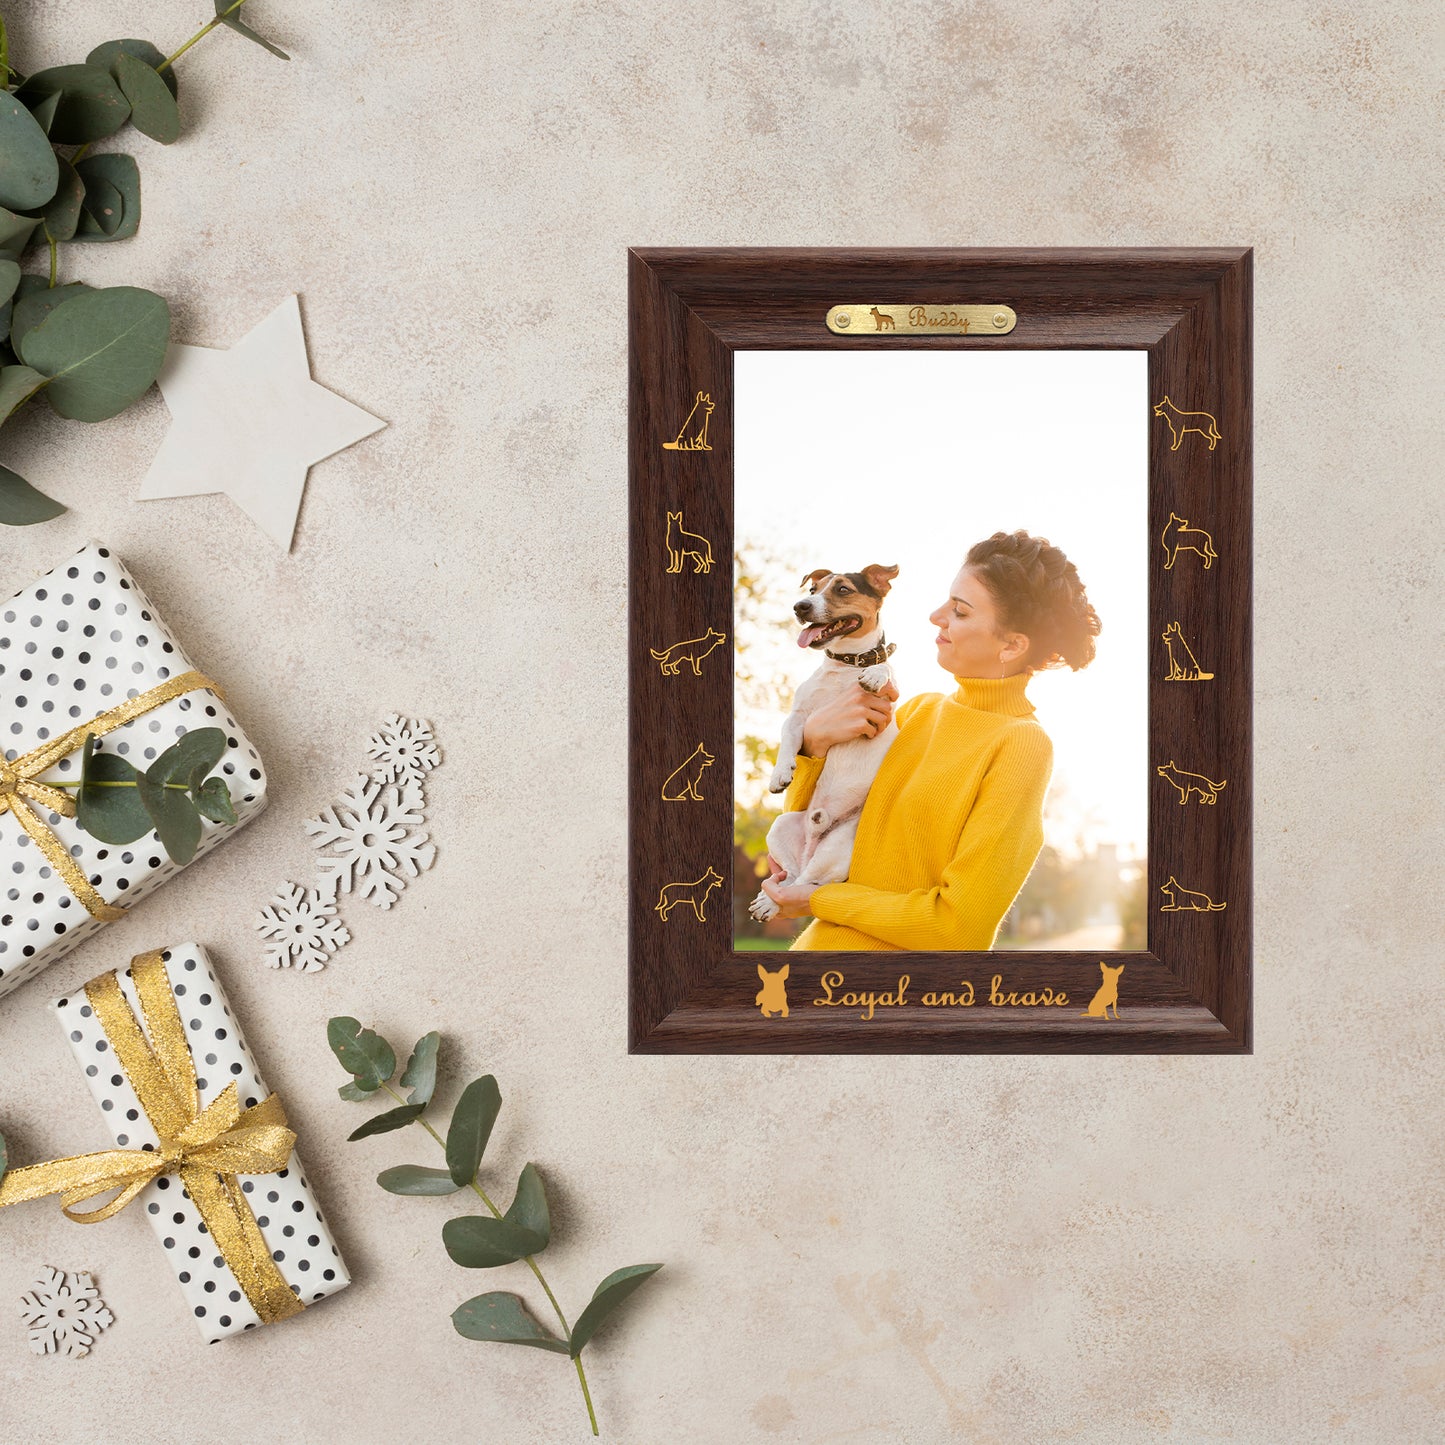 Dotride Custom Picture Frame, Wood Photo Frame with Custom Wooden Carving, Can be engraved with any text you want, suitable for Suitable for Various Themes, Dog